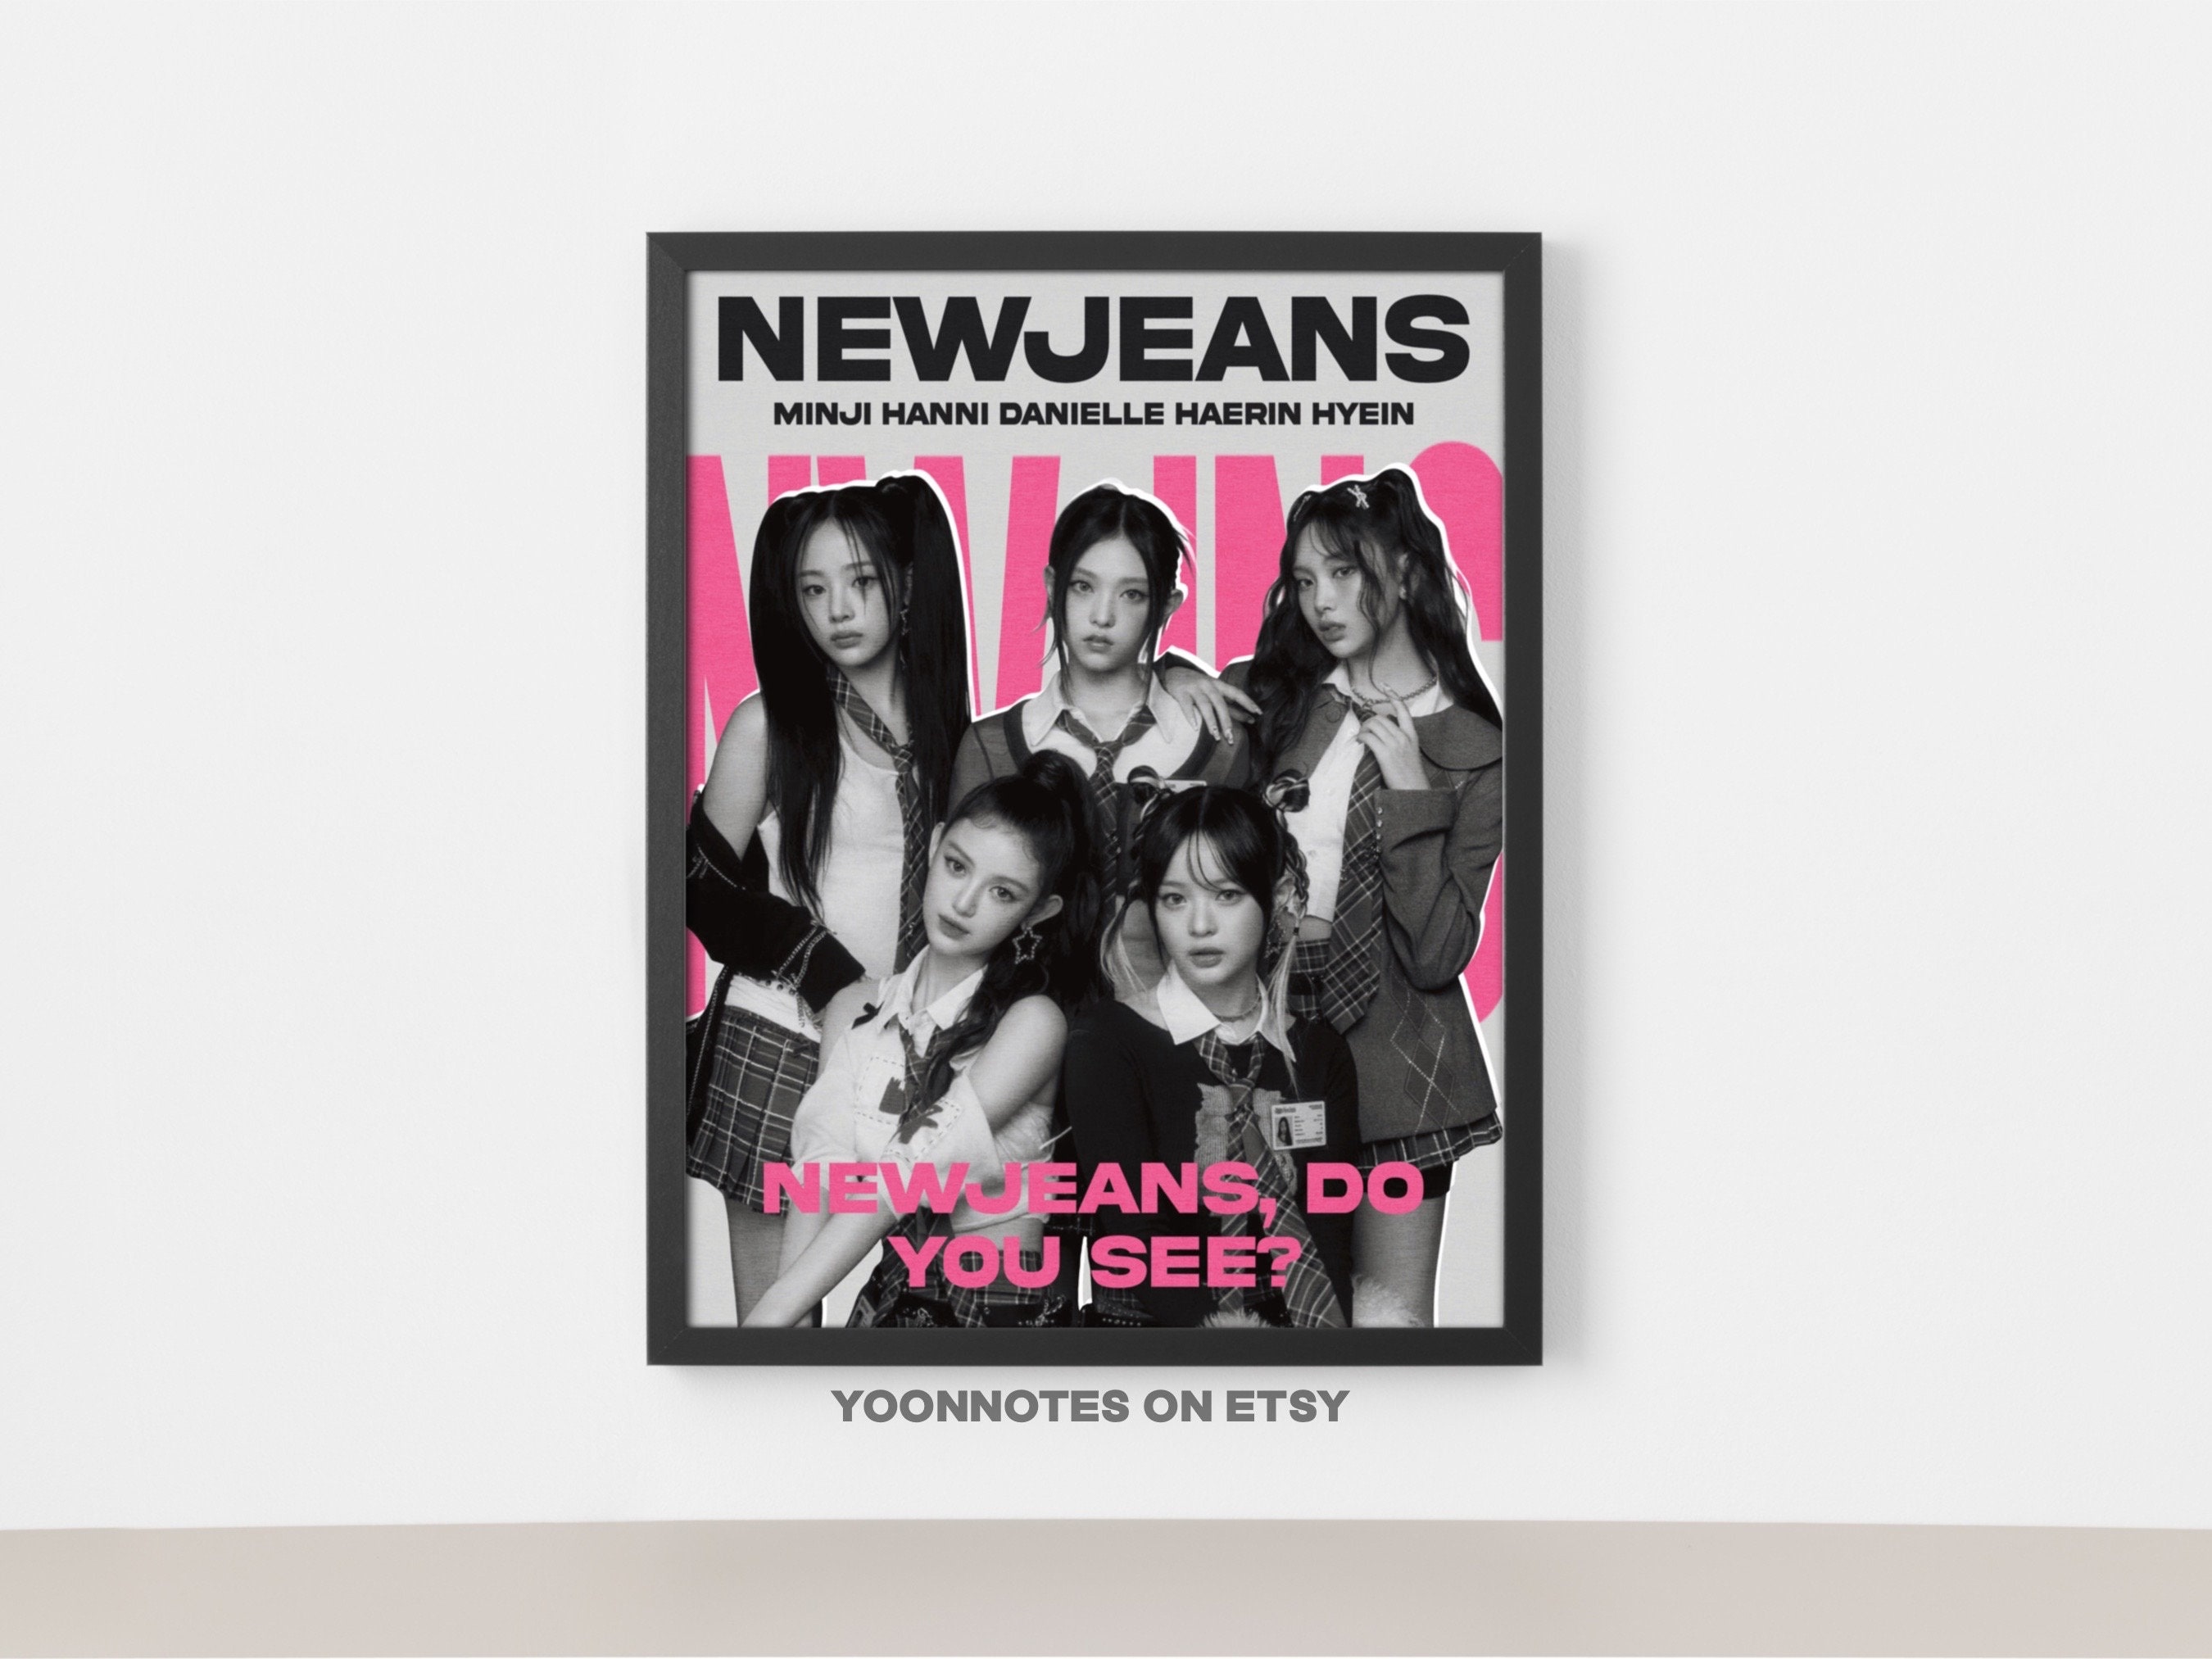 Set of 3 NEWJEANS Poster Kpop Prints and Wall Art for Room Decor